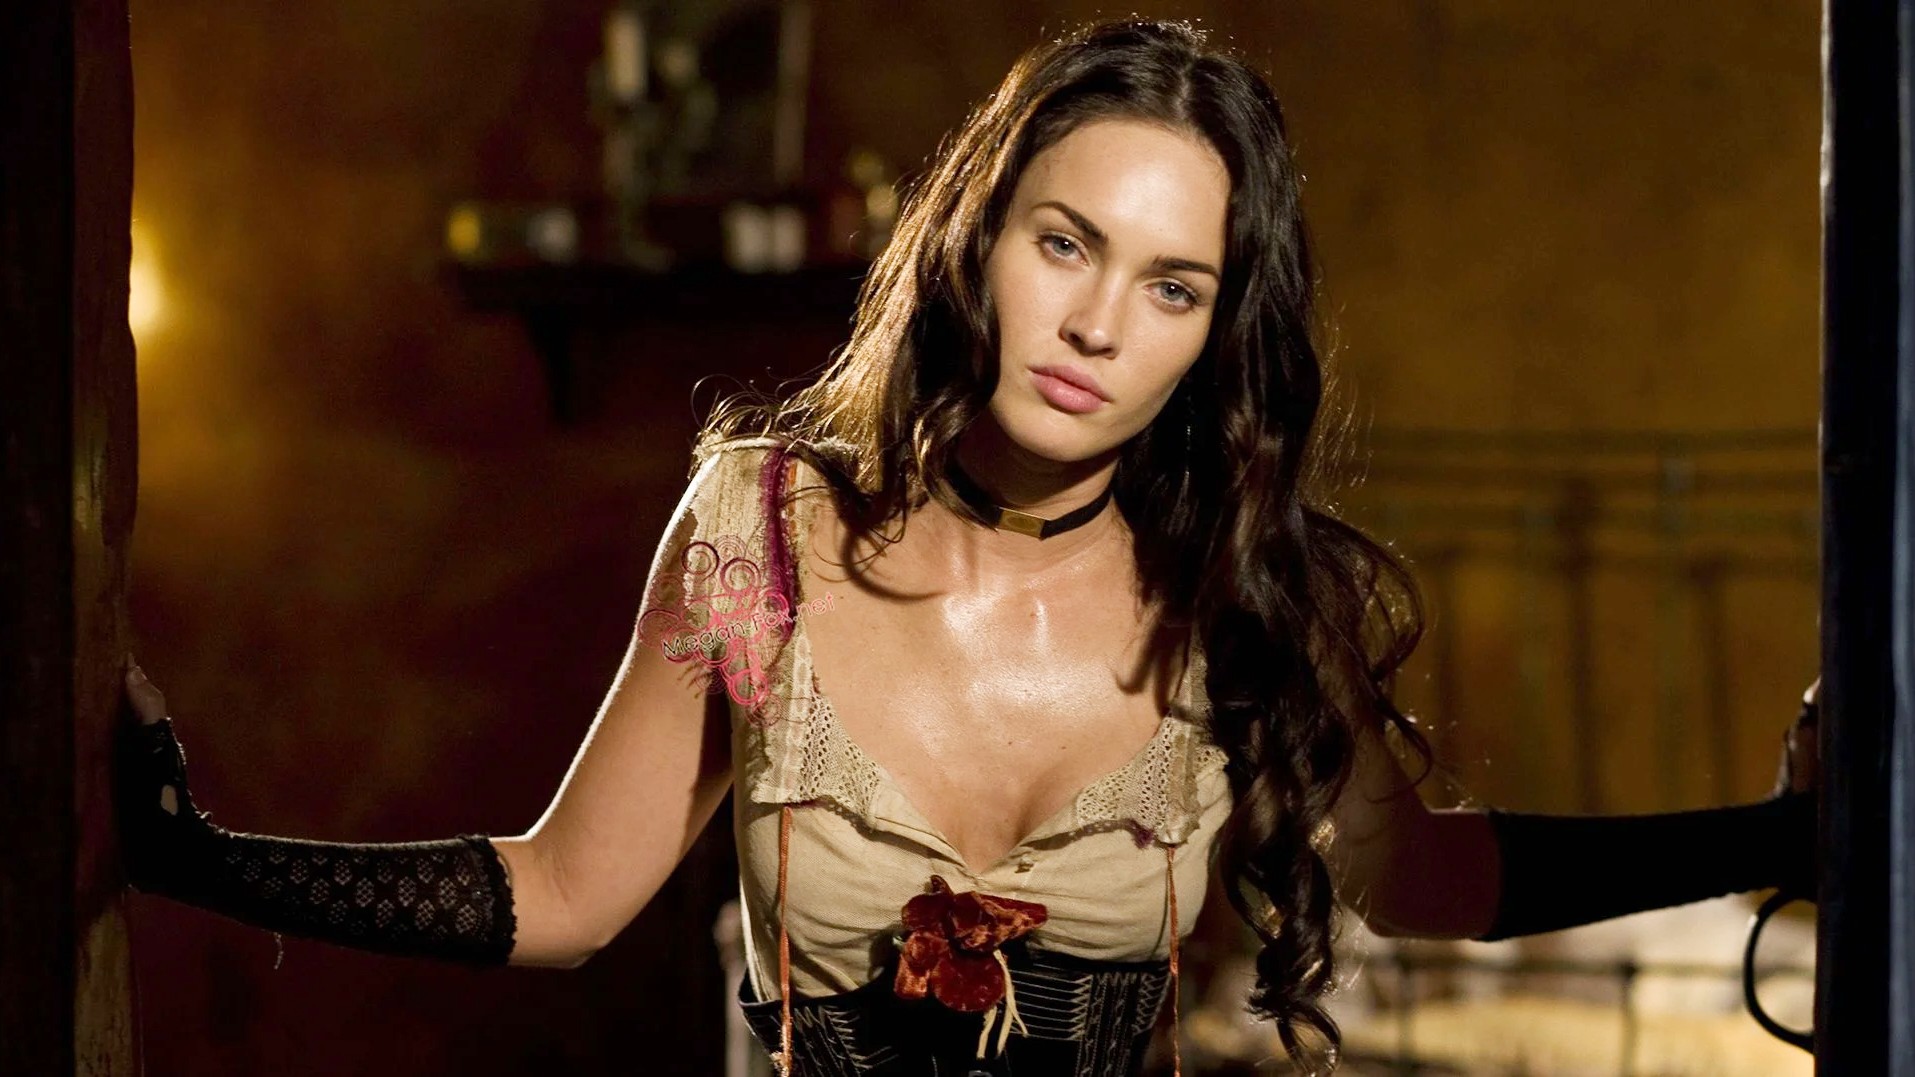 Sexy Supergirl Megan Fox - Megan Fox Is Drop Dead Sexy In First Video For New Movie